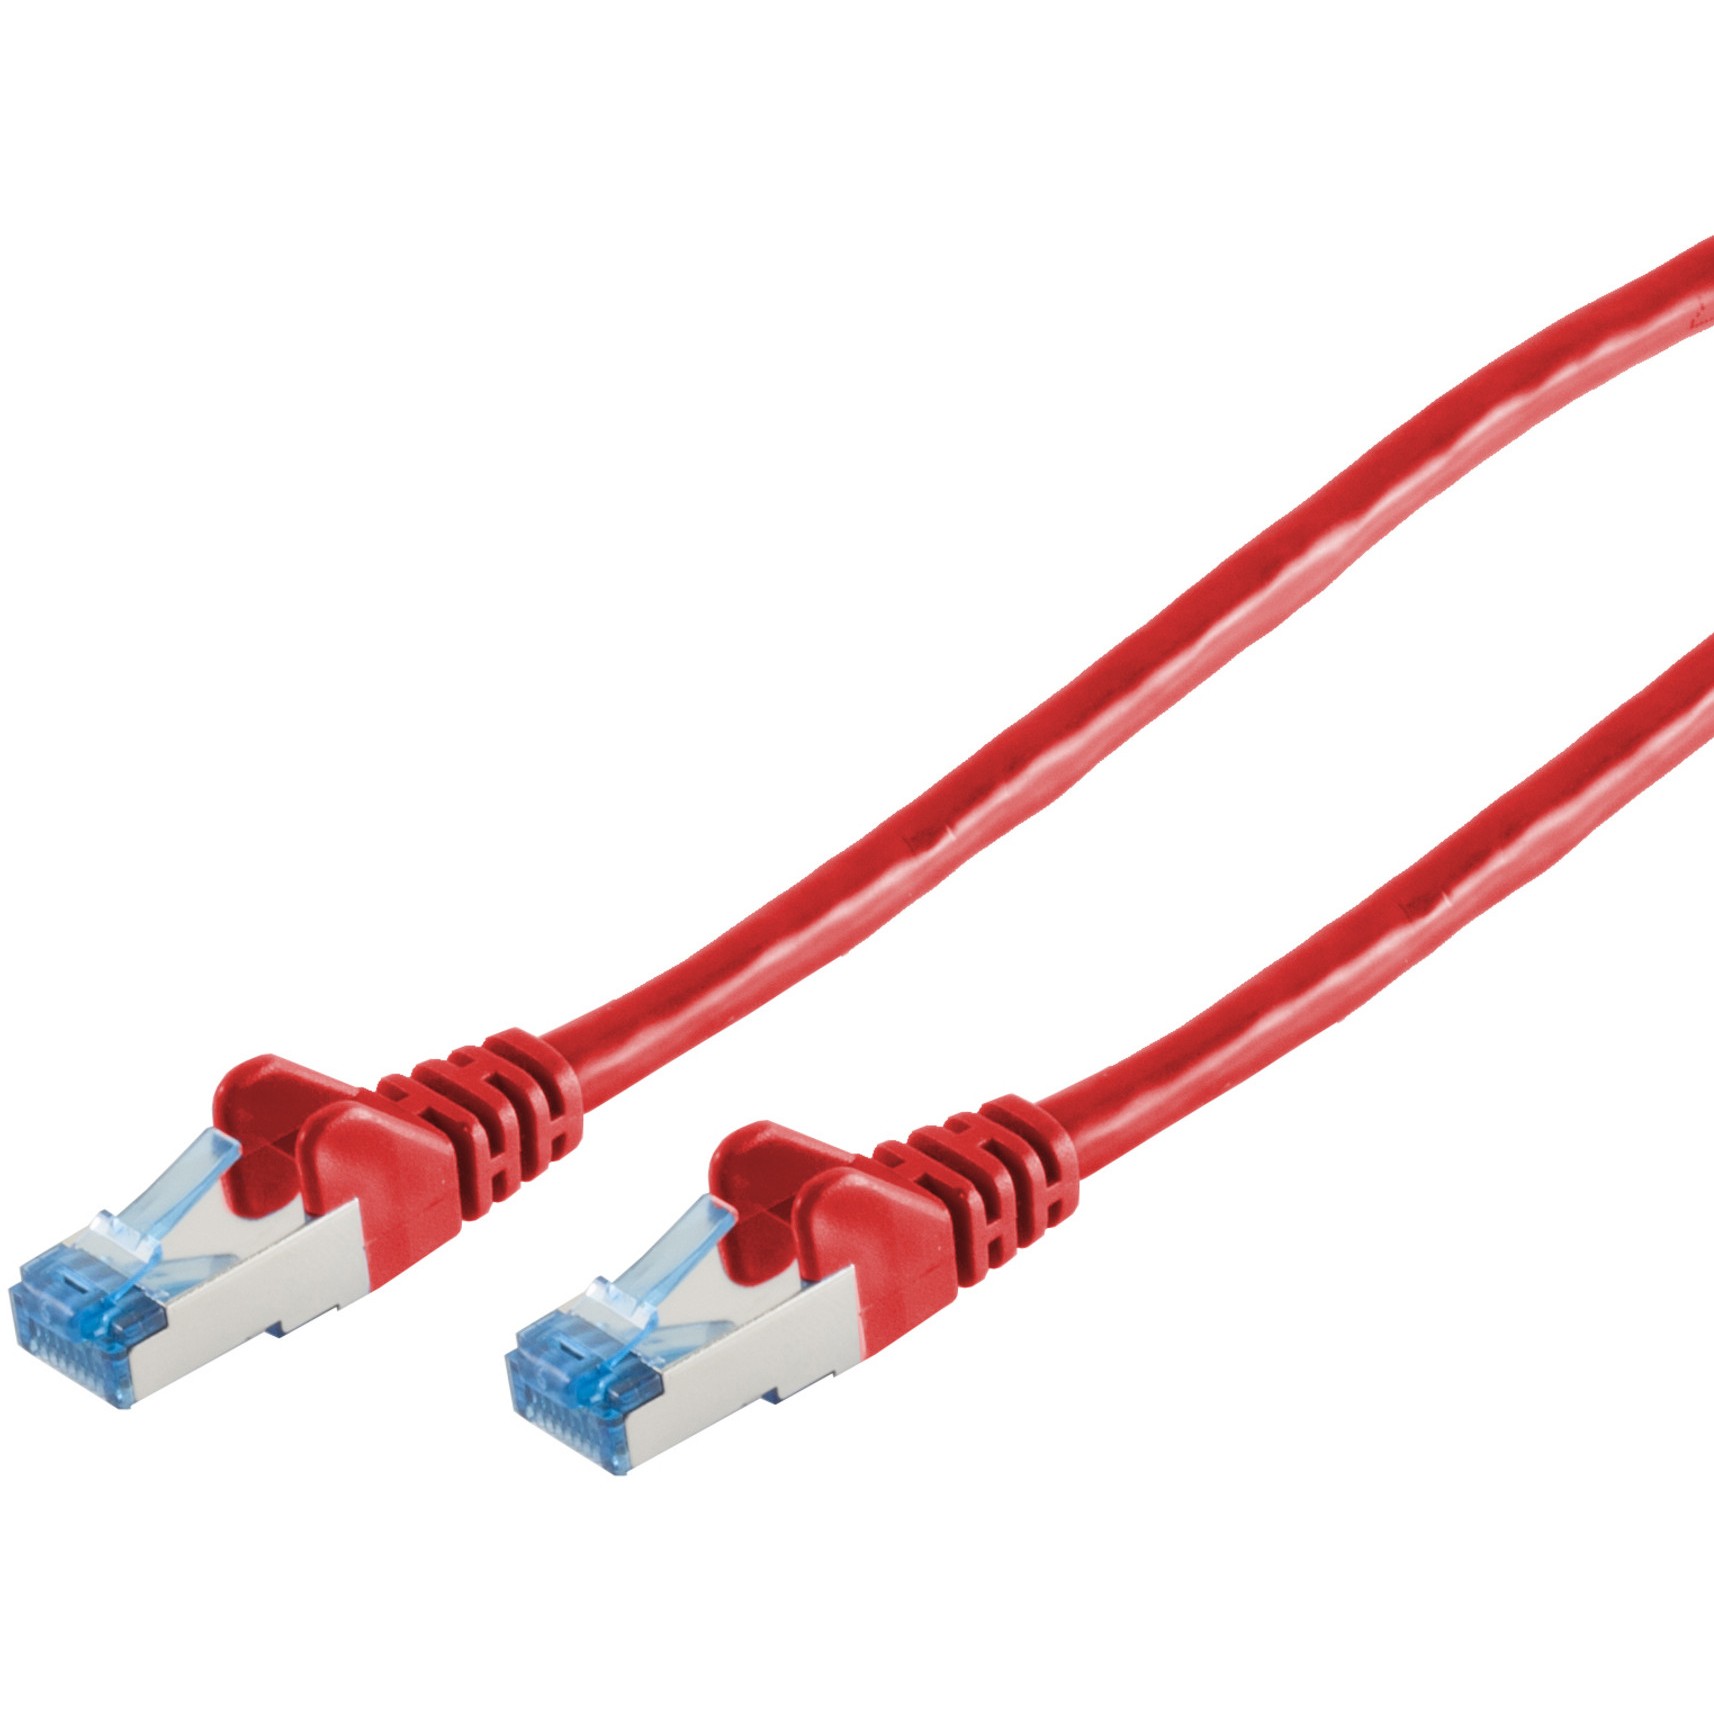 S-Conn 75715-R networking cable